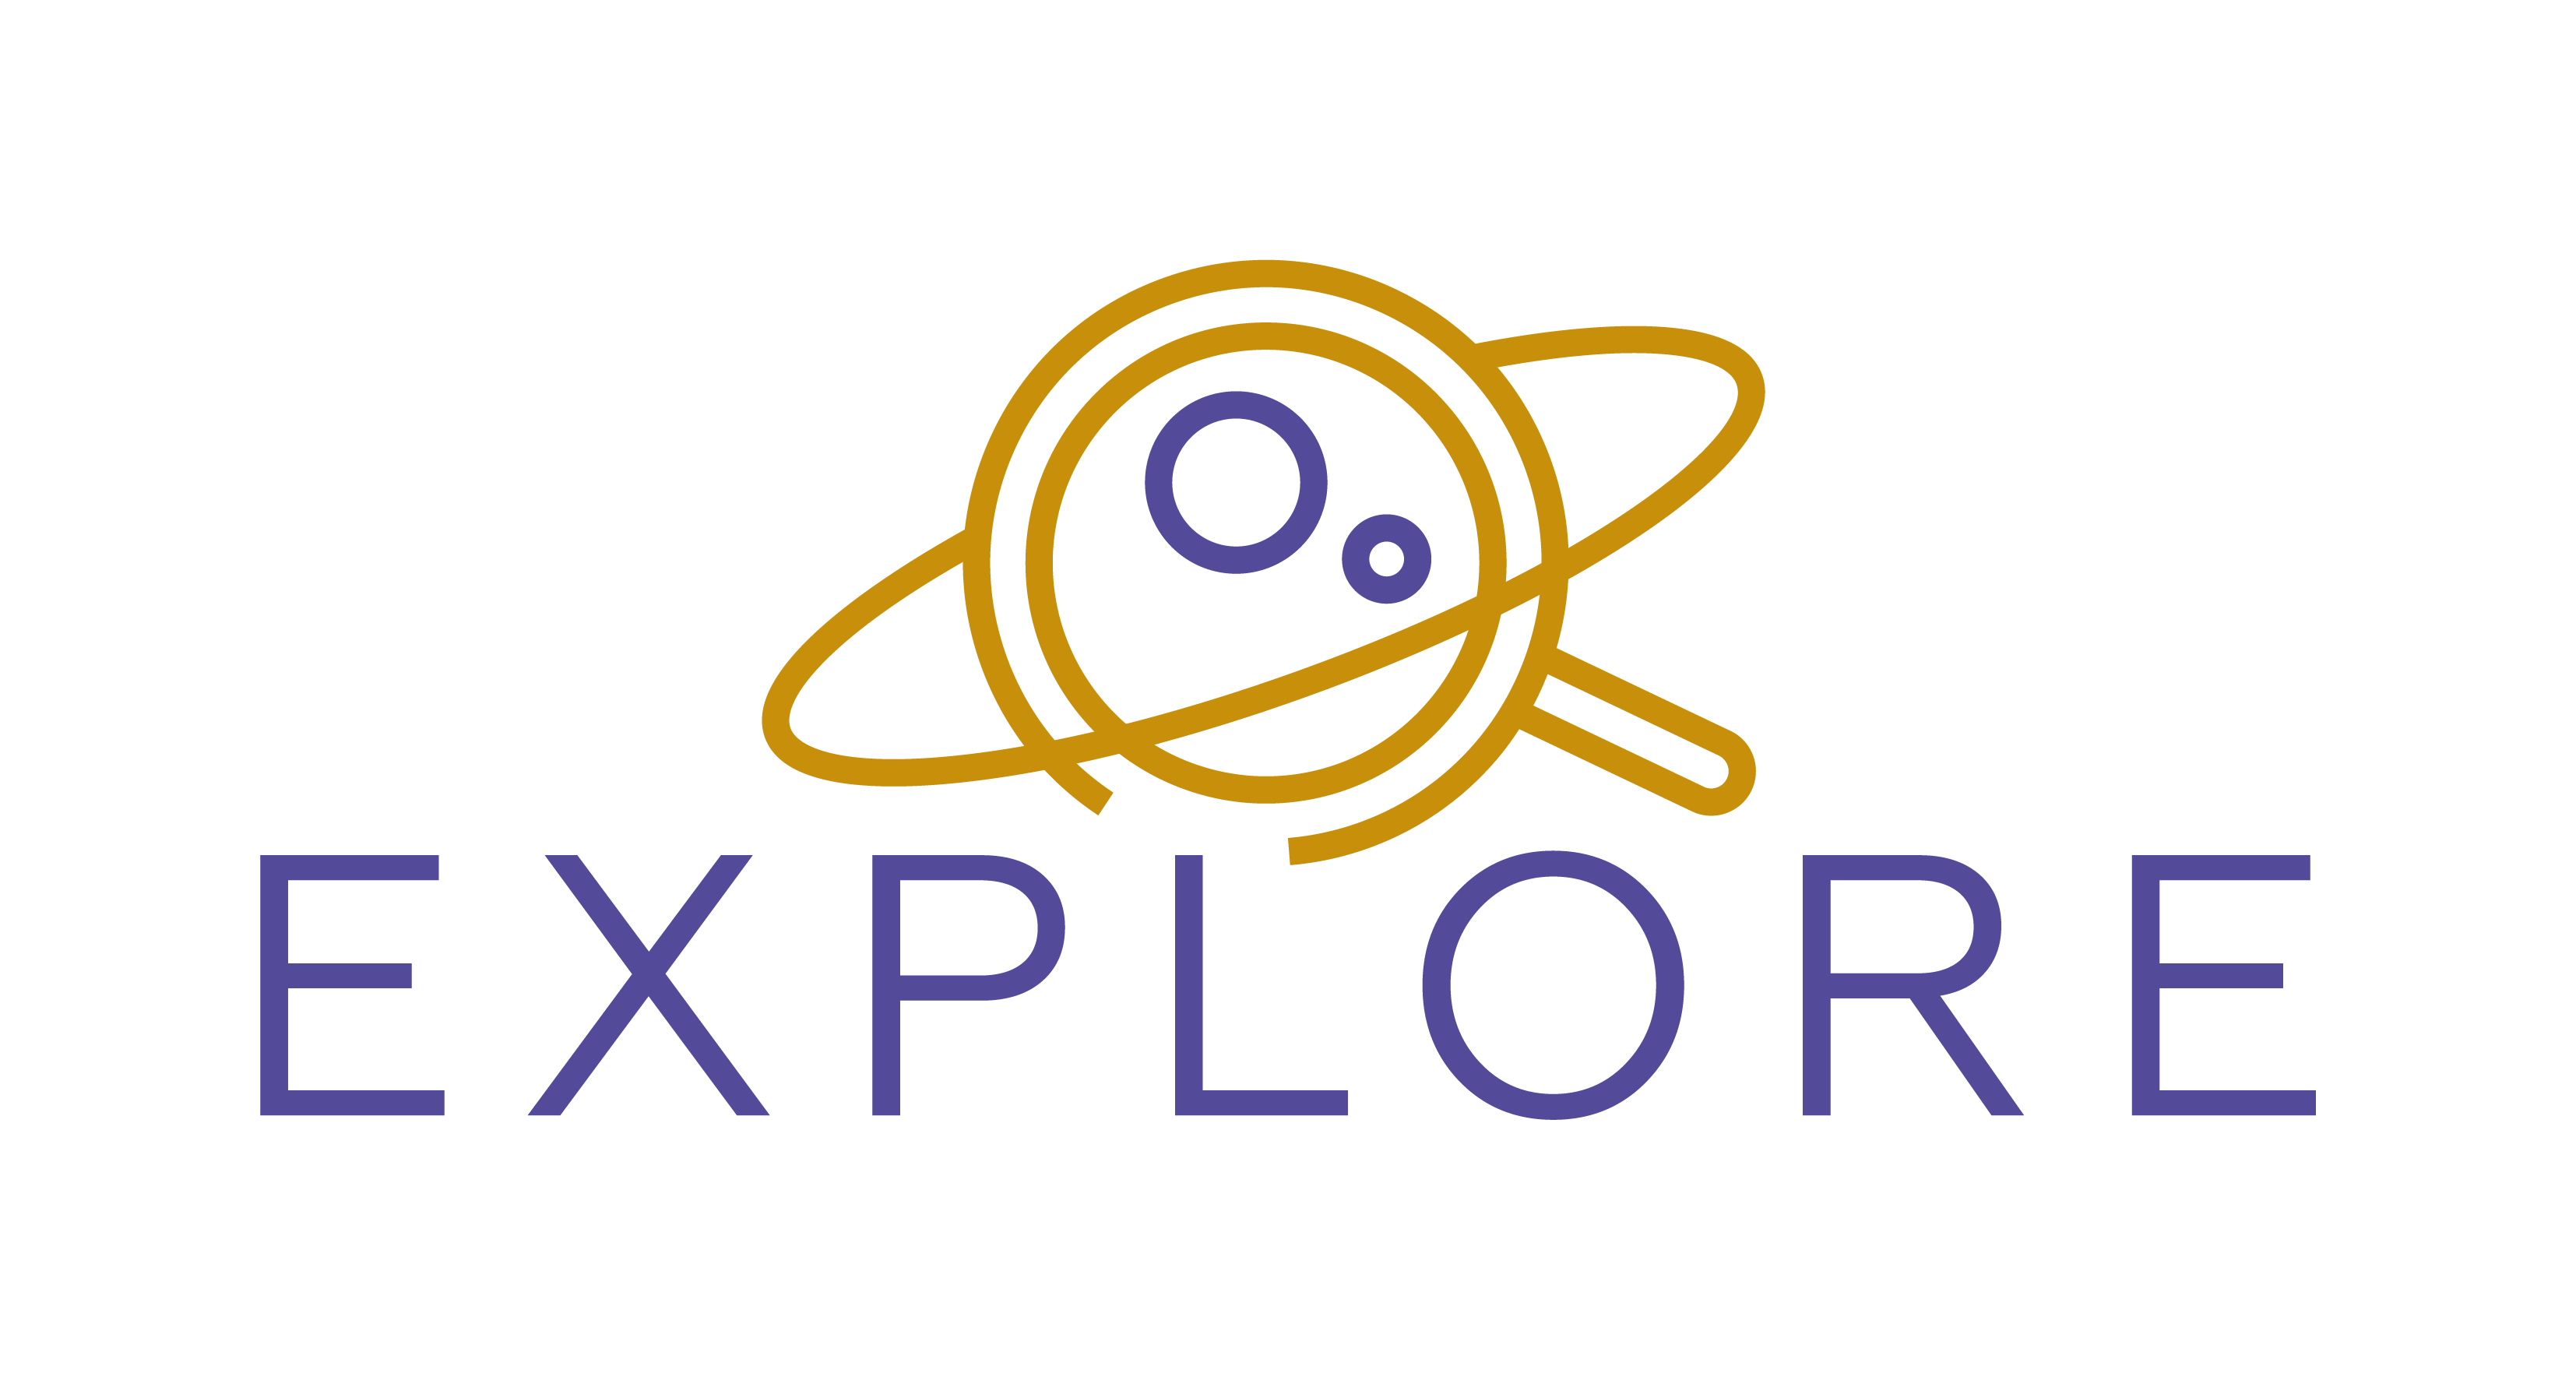 EXPLORE - Innovative Scientific Data Exploration
and Exploitation Applications for Space Sciences